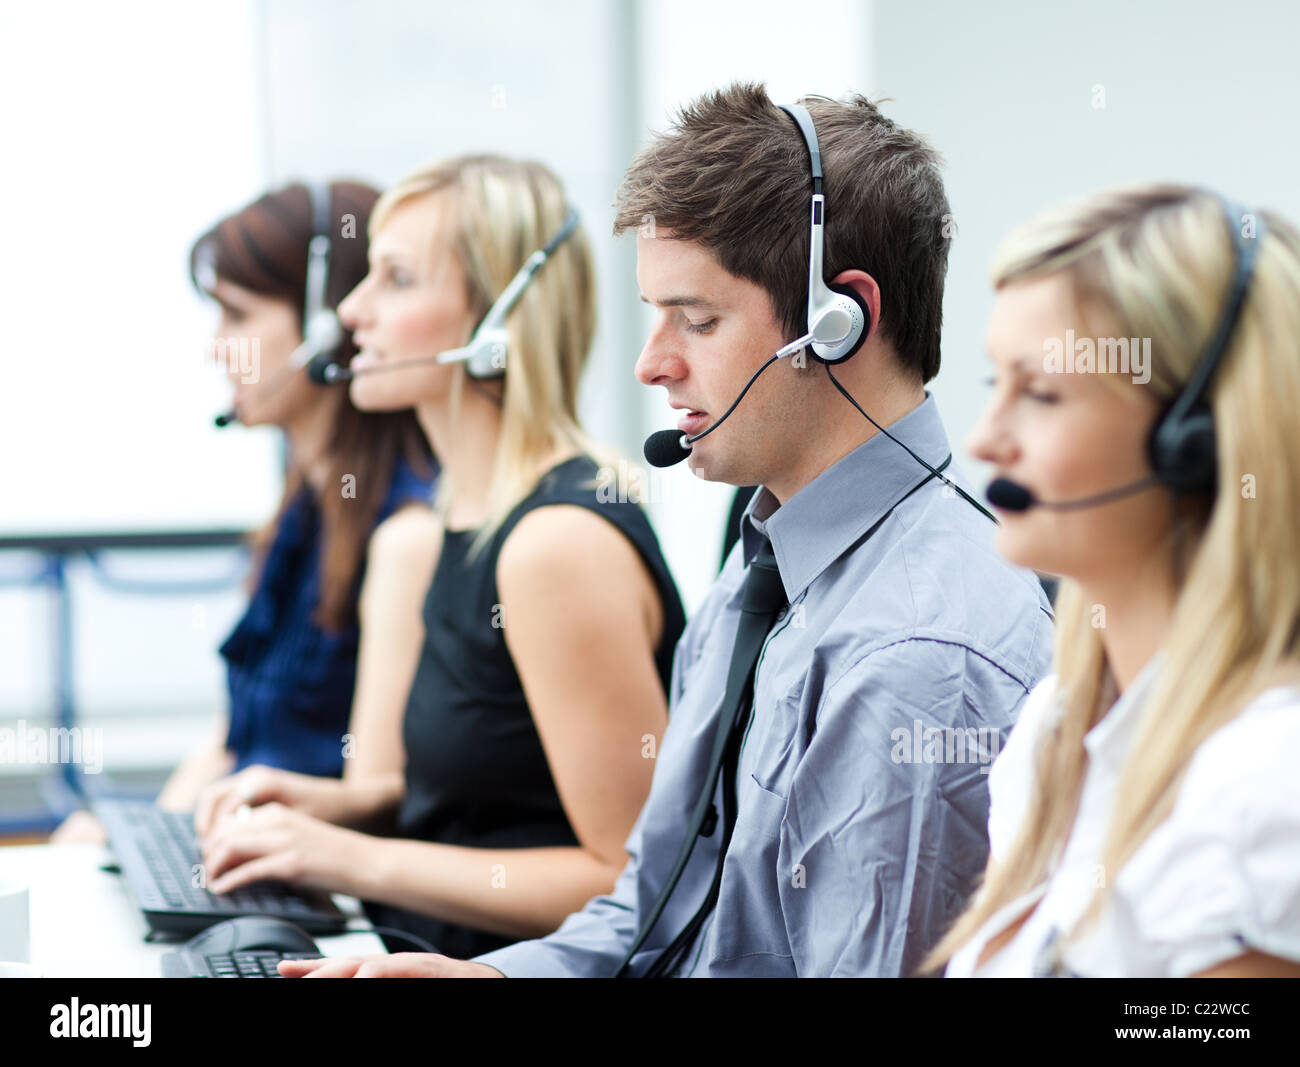 Attractive young man working in a call center Stock Photo